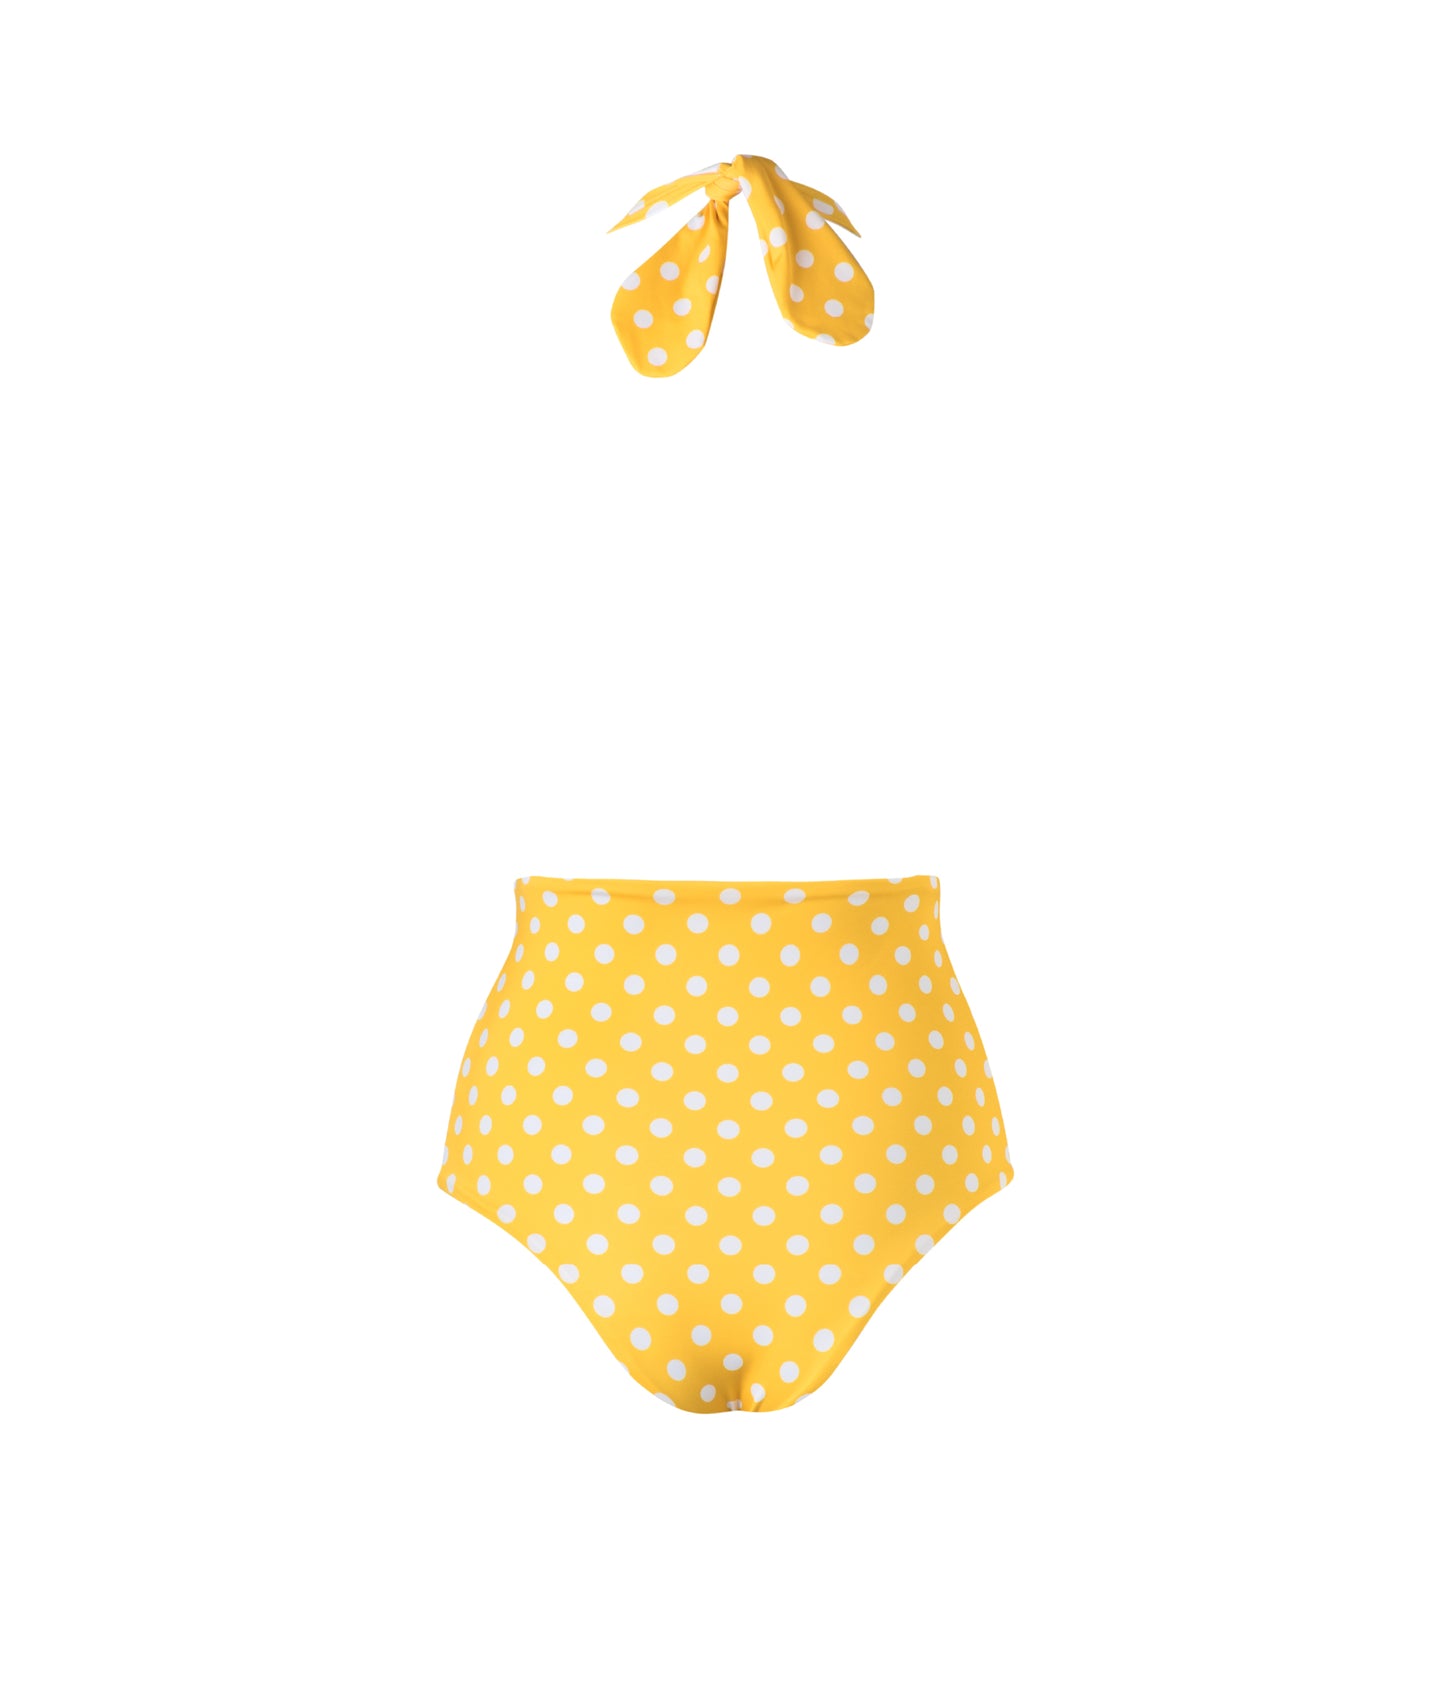 Verdelimon - One Piece - Nara - Printed - Yellow Dots - Back